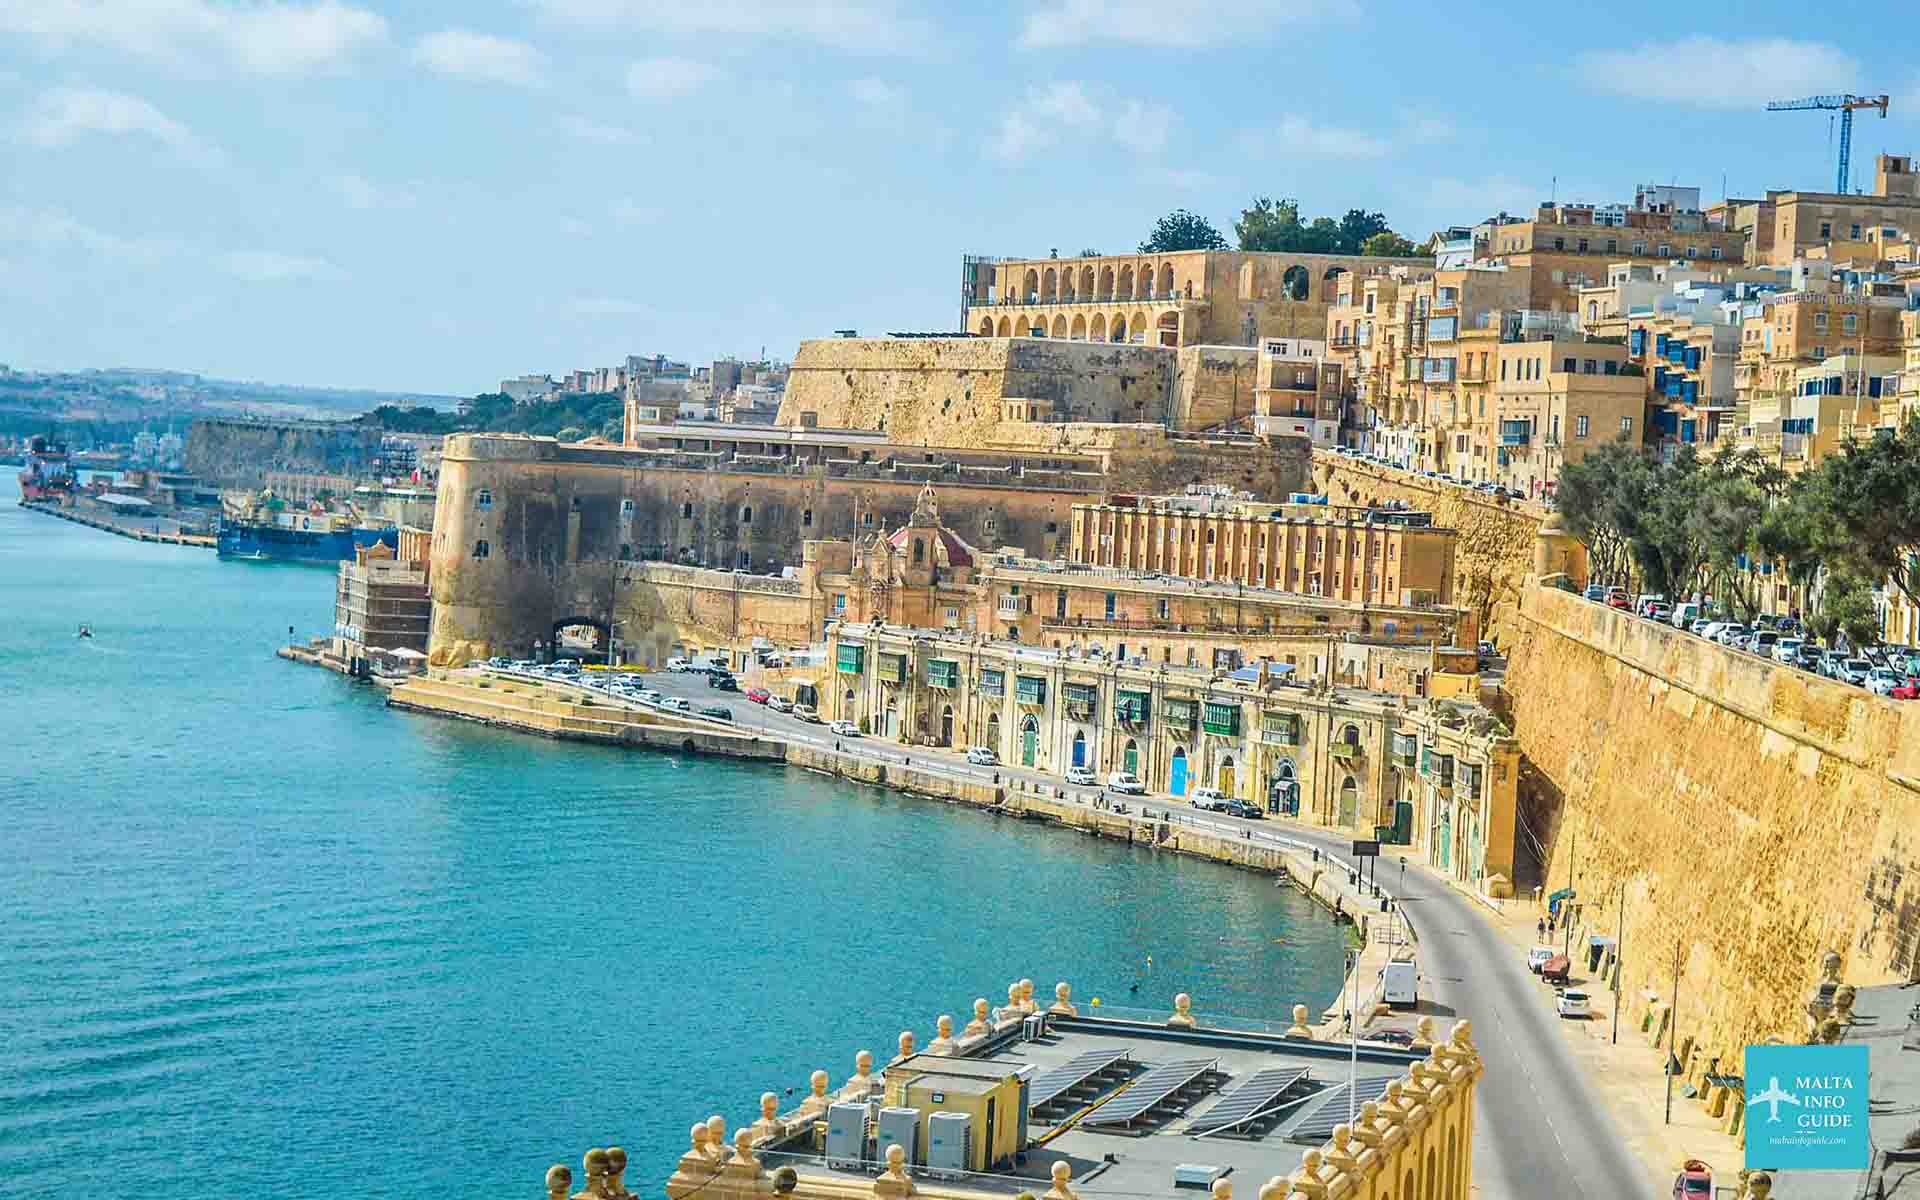 The fortifications of Valletta